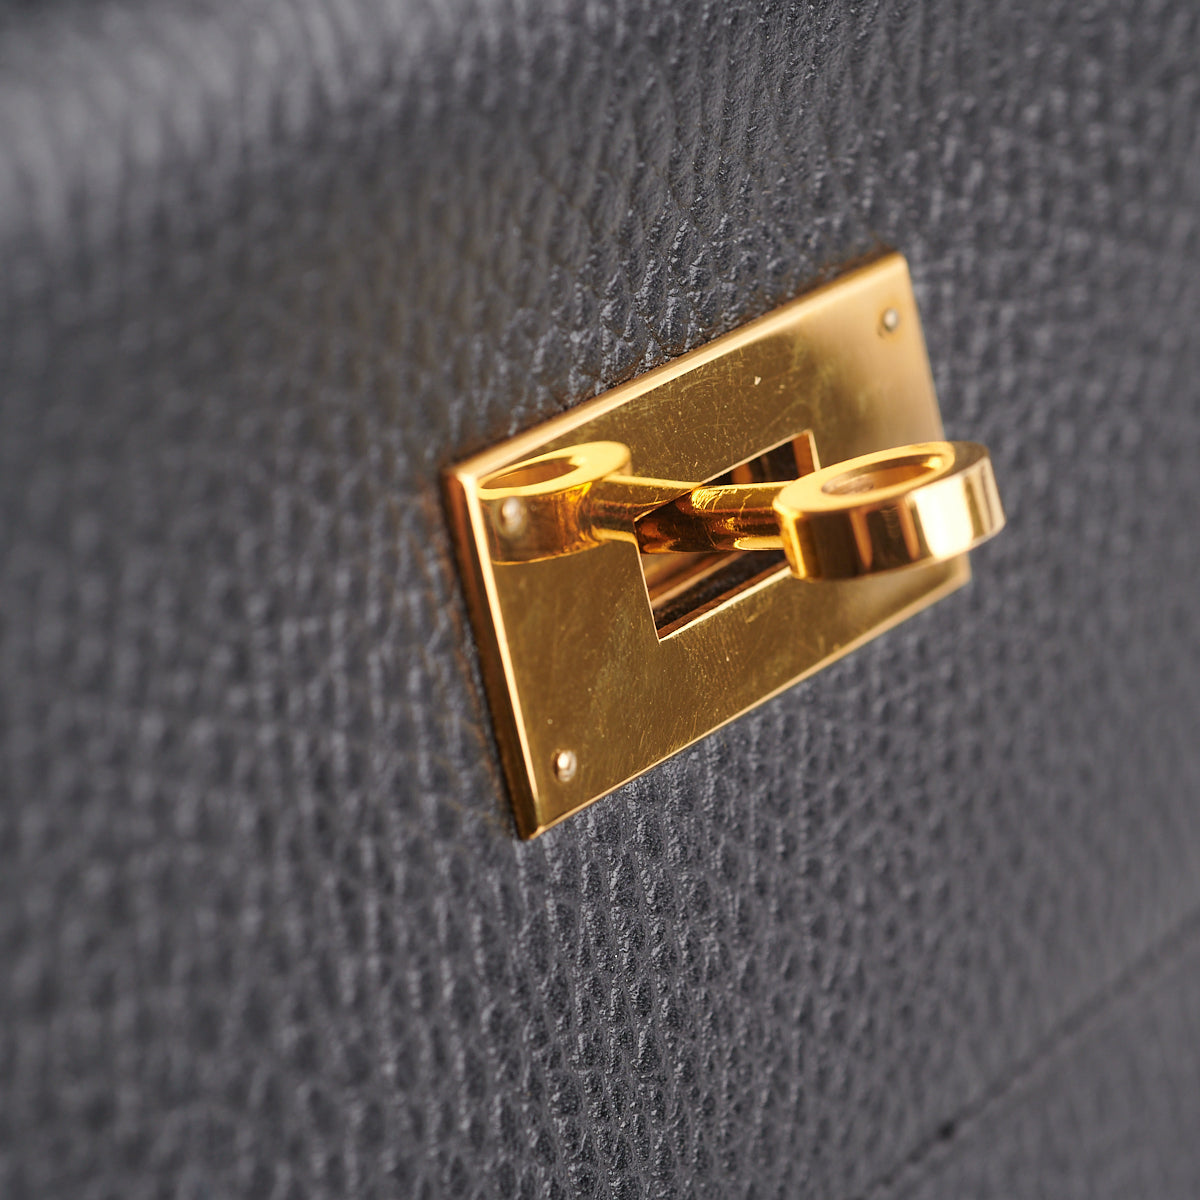 Vintage Hermes Kelly 40 in Noir Ardennes from 2000 Available